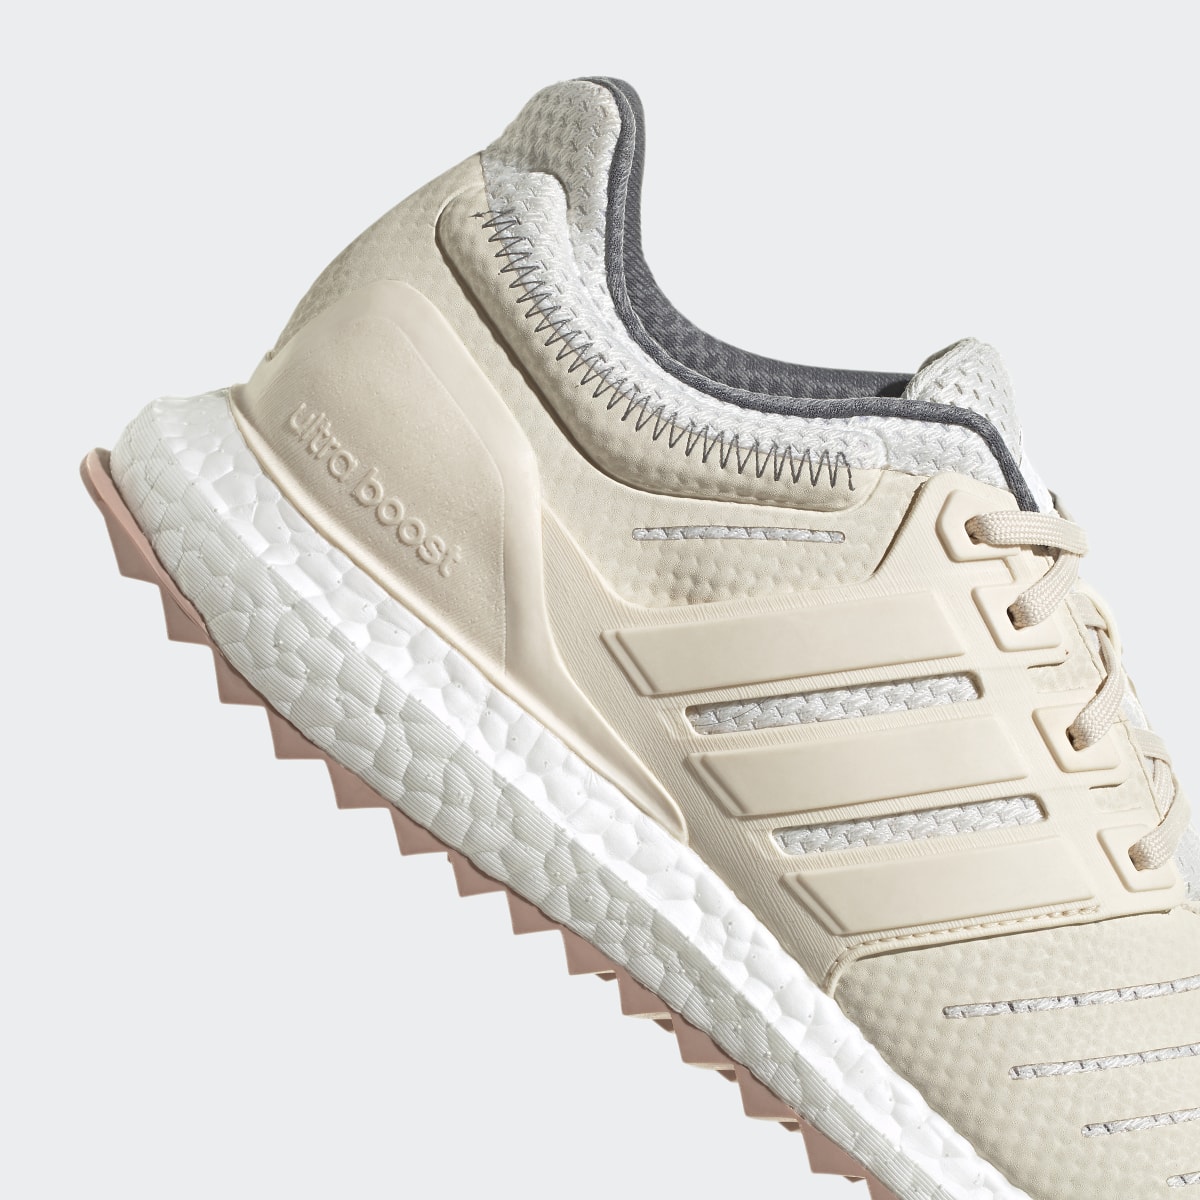 Adidas Chaussure Ultraboost DNA XXII Lifestyle Running Sportswear Capsule Collection. 9